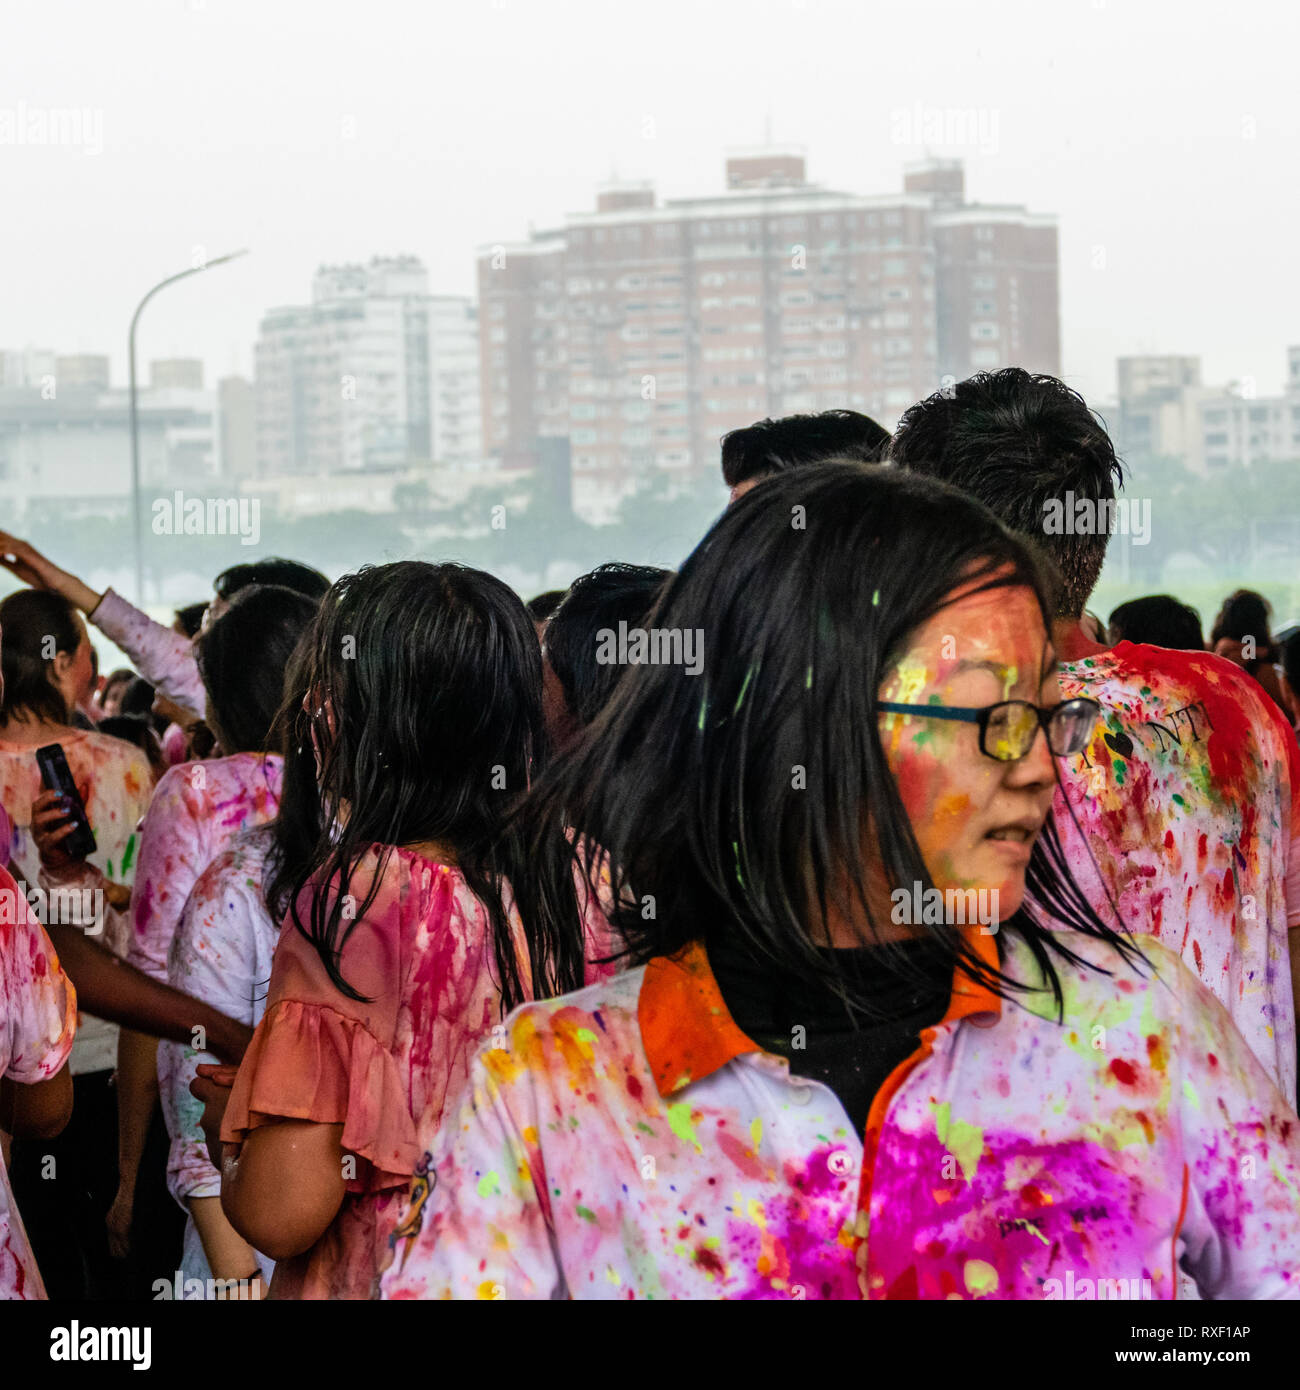 TAIPEI, TAIWAN - MARCH 9, 2019: Happy people dancing and celebrating Holi festival of colors Stock Photo